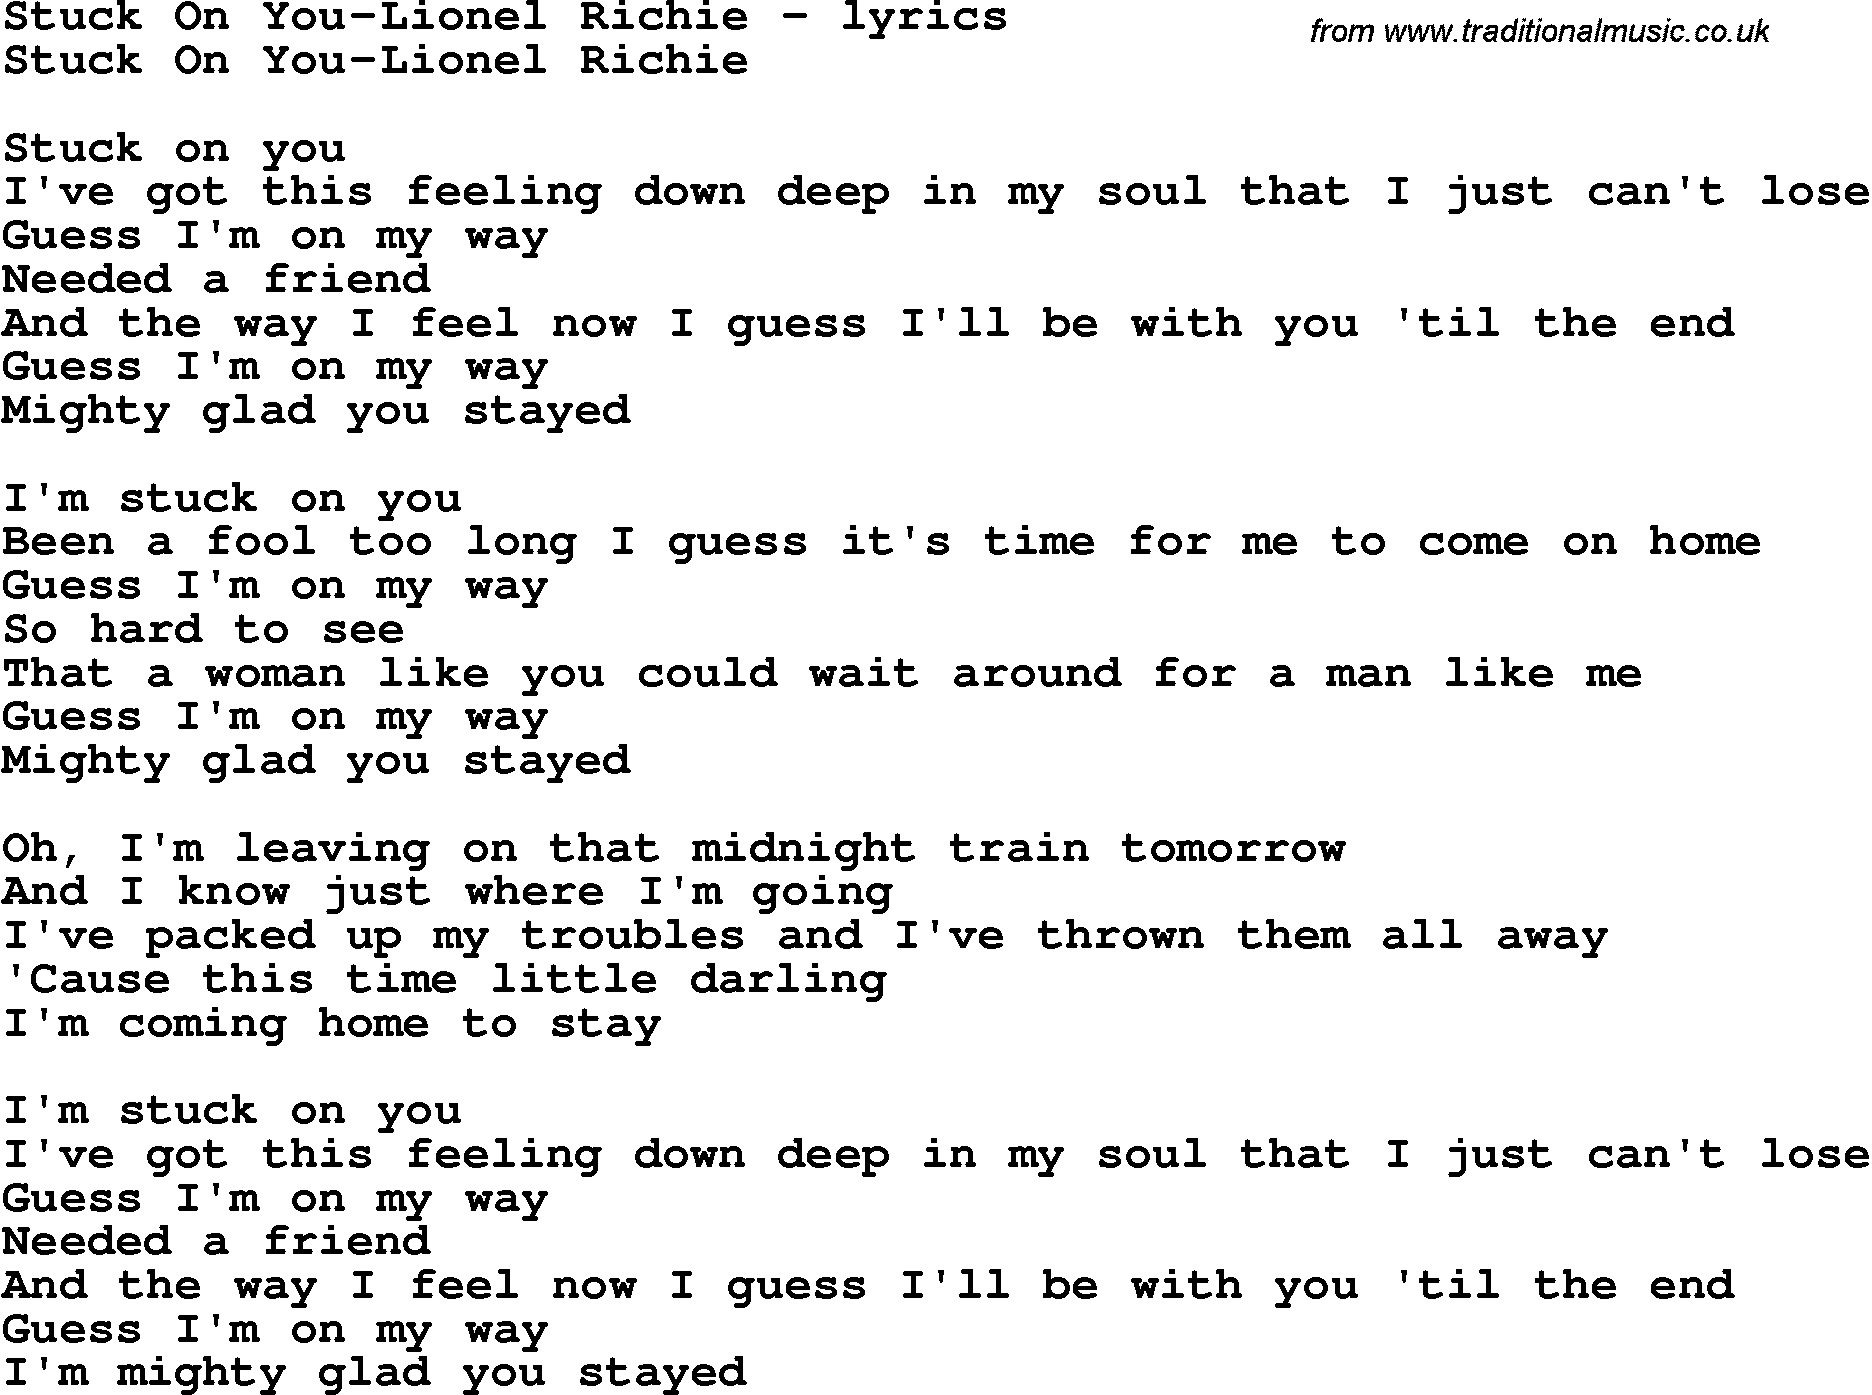 Love Song Lyrics for: Stuck On You-Lionel Richie